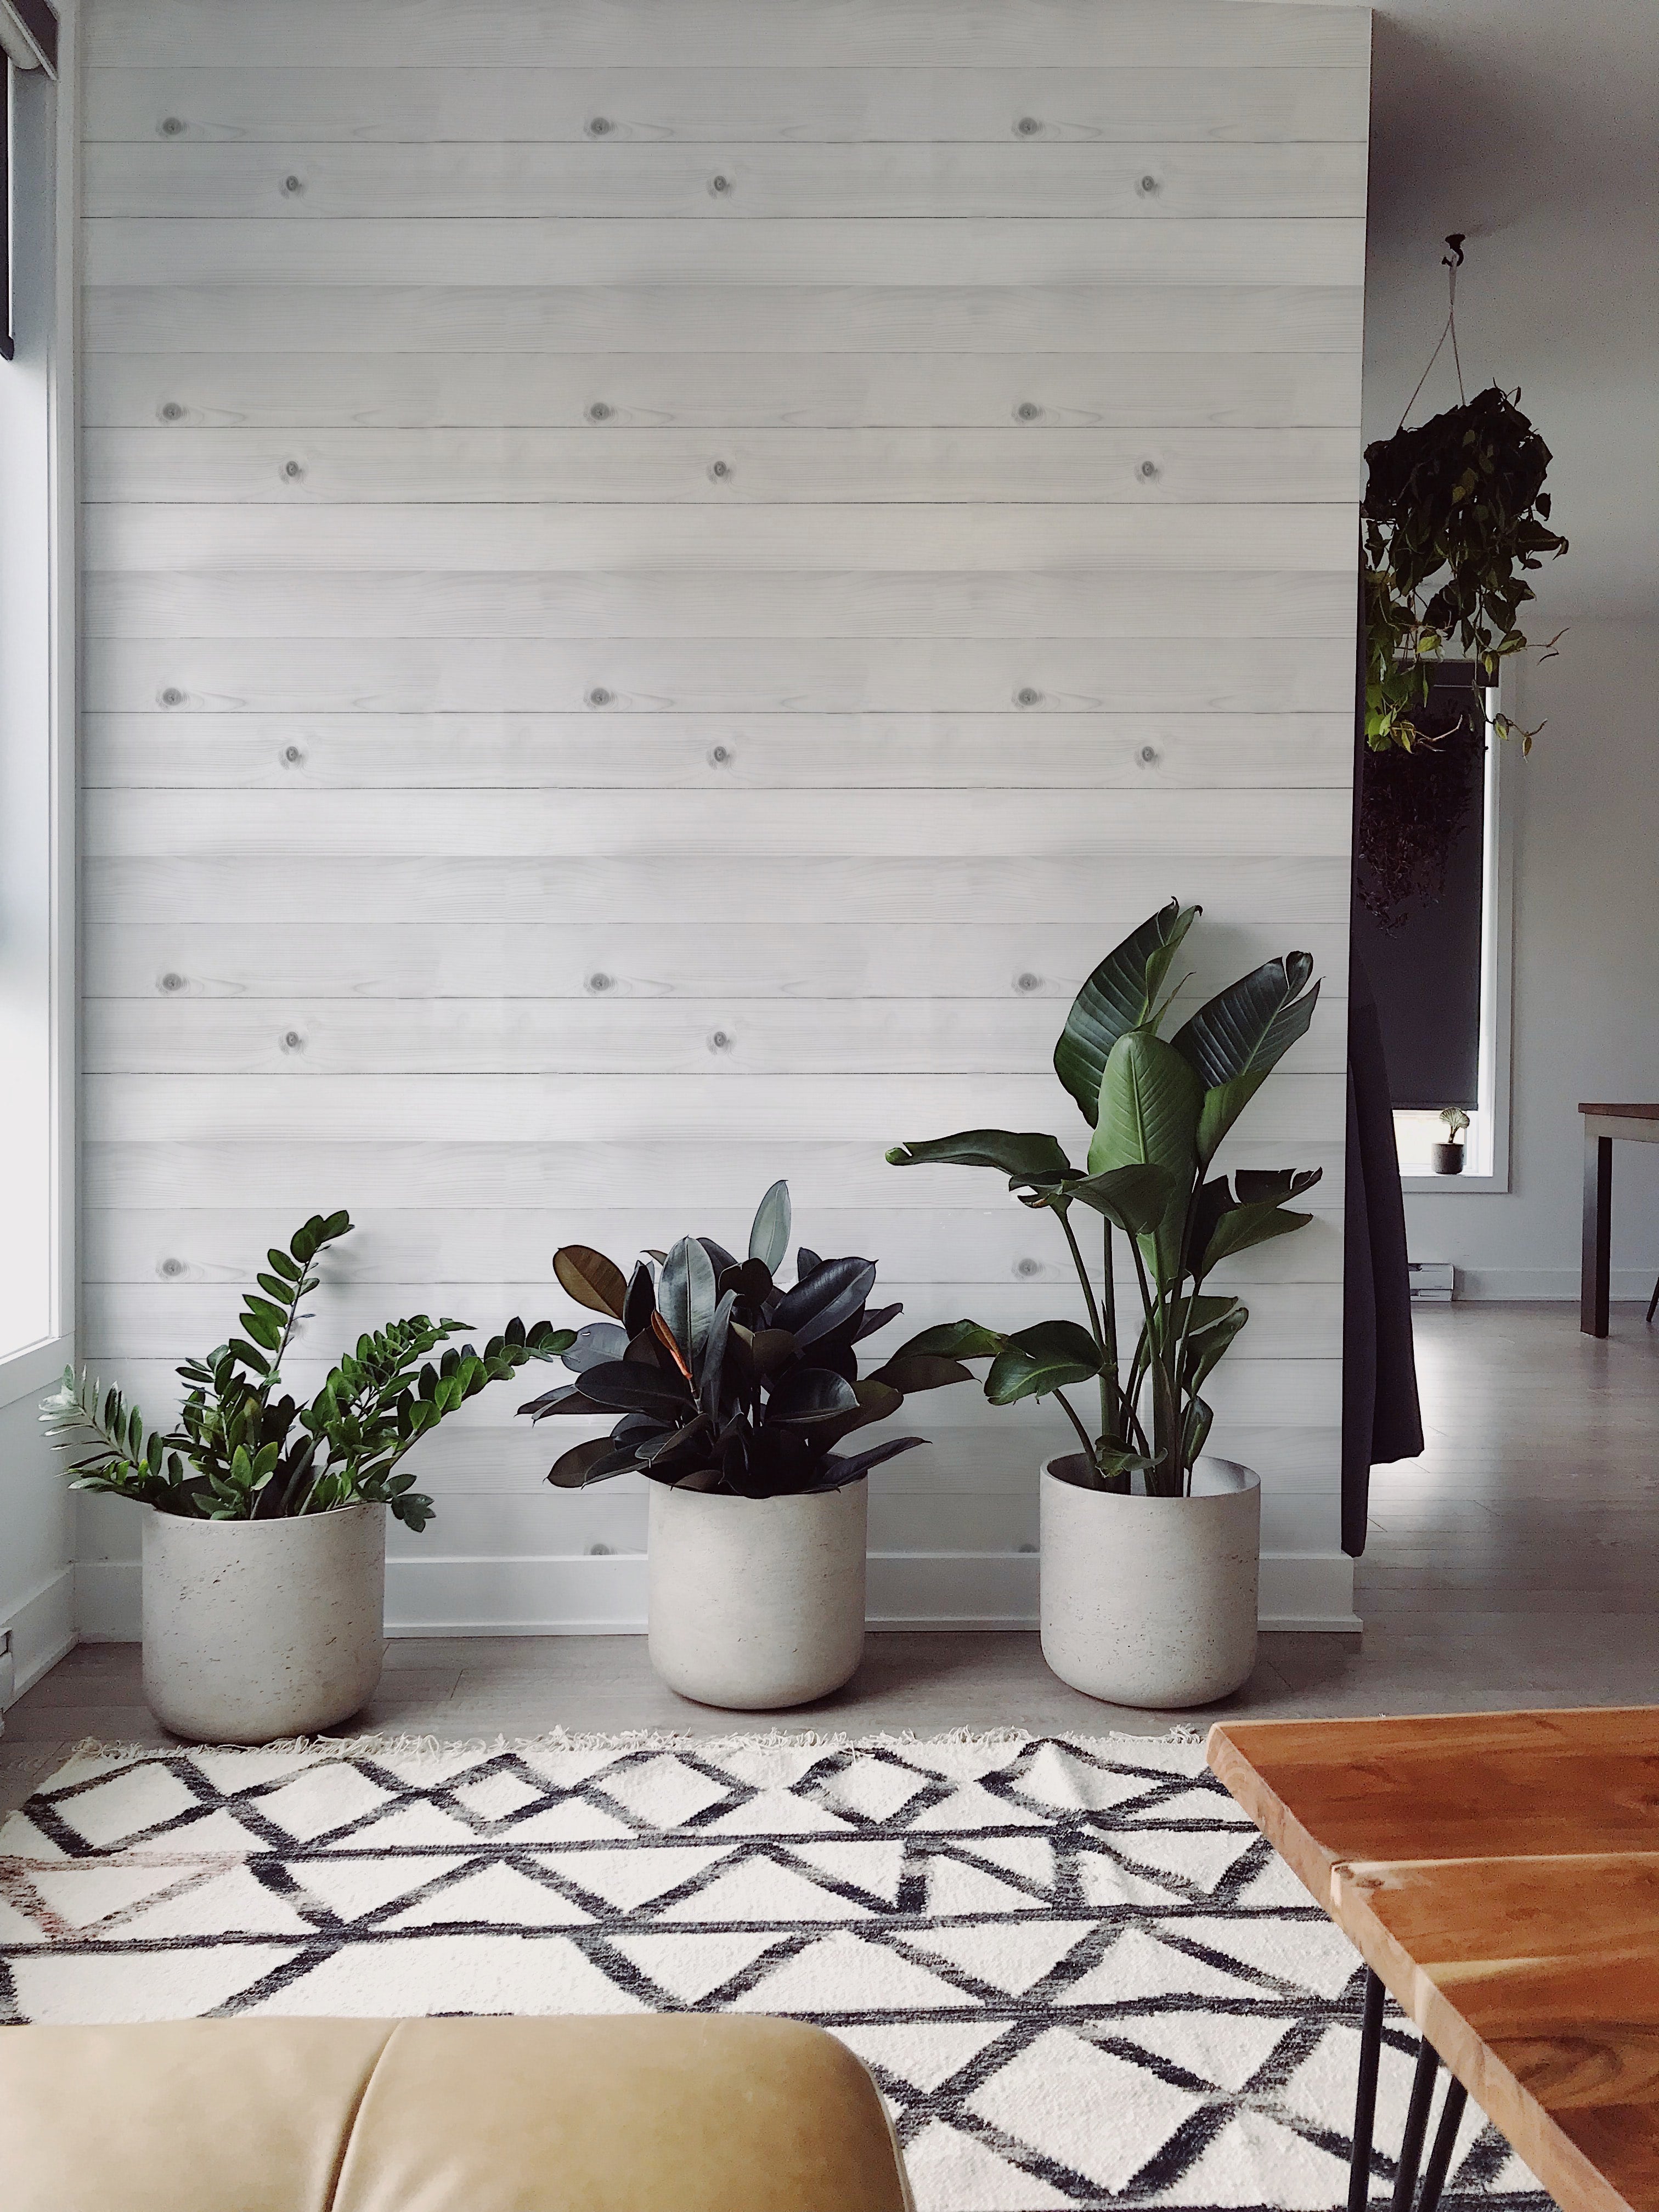 A stylish interior featuring the Realistic Wooden Wallpaper applied to a wall, accompanied by modern decor elements such as large potted plants, enhancing the fresh and contemporary look of the room.